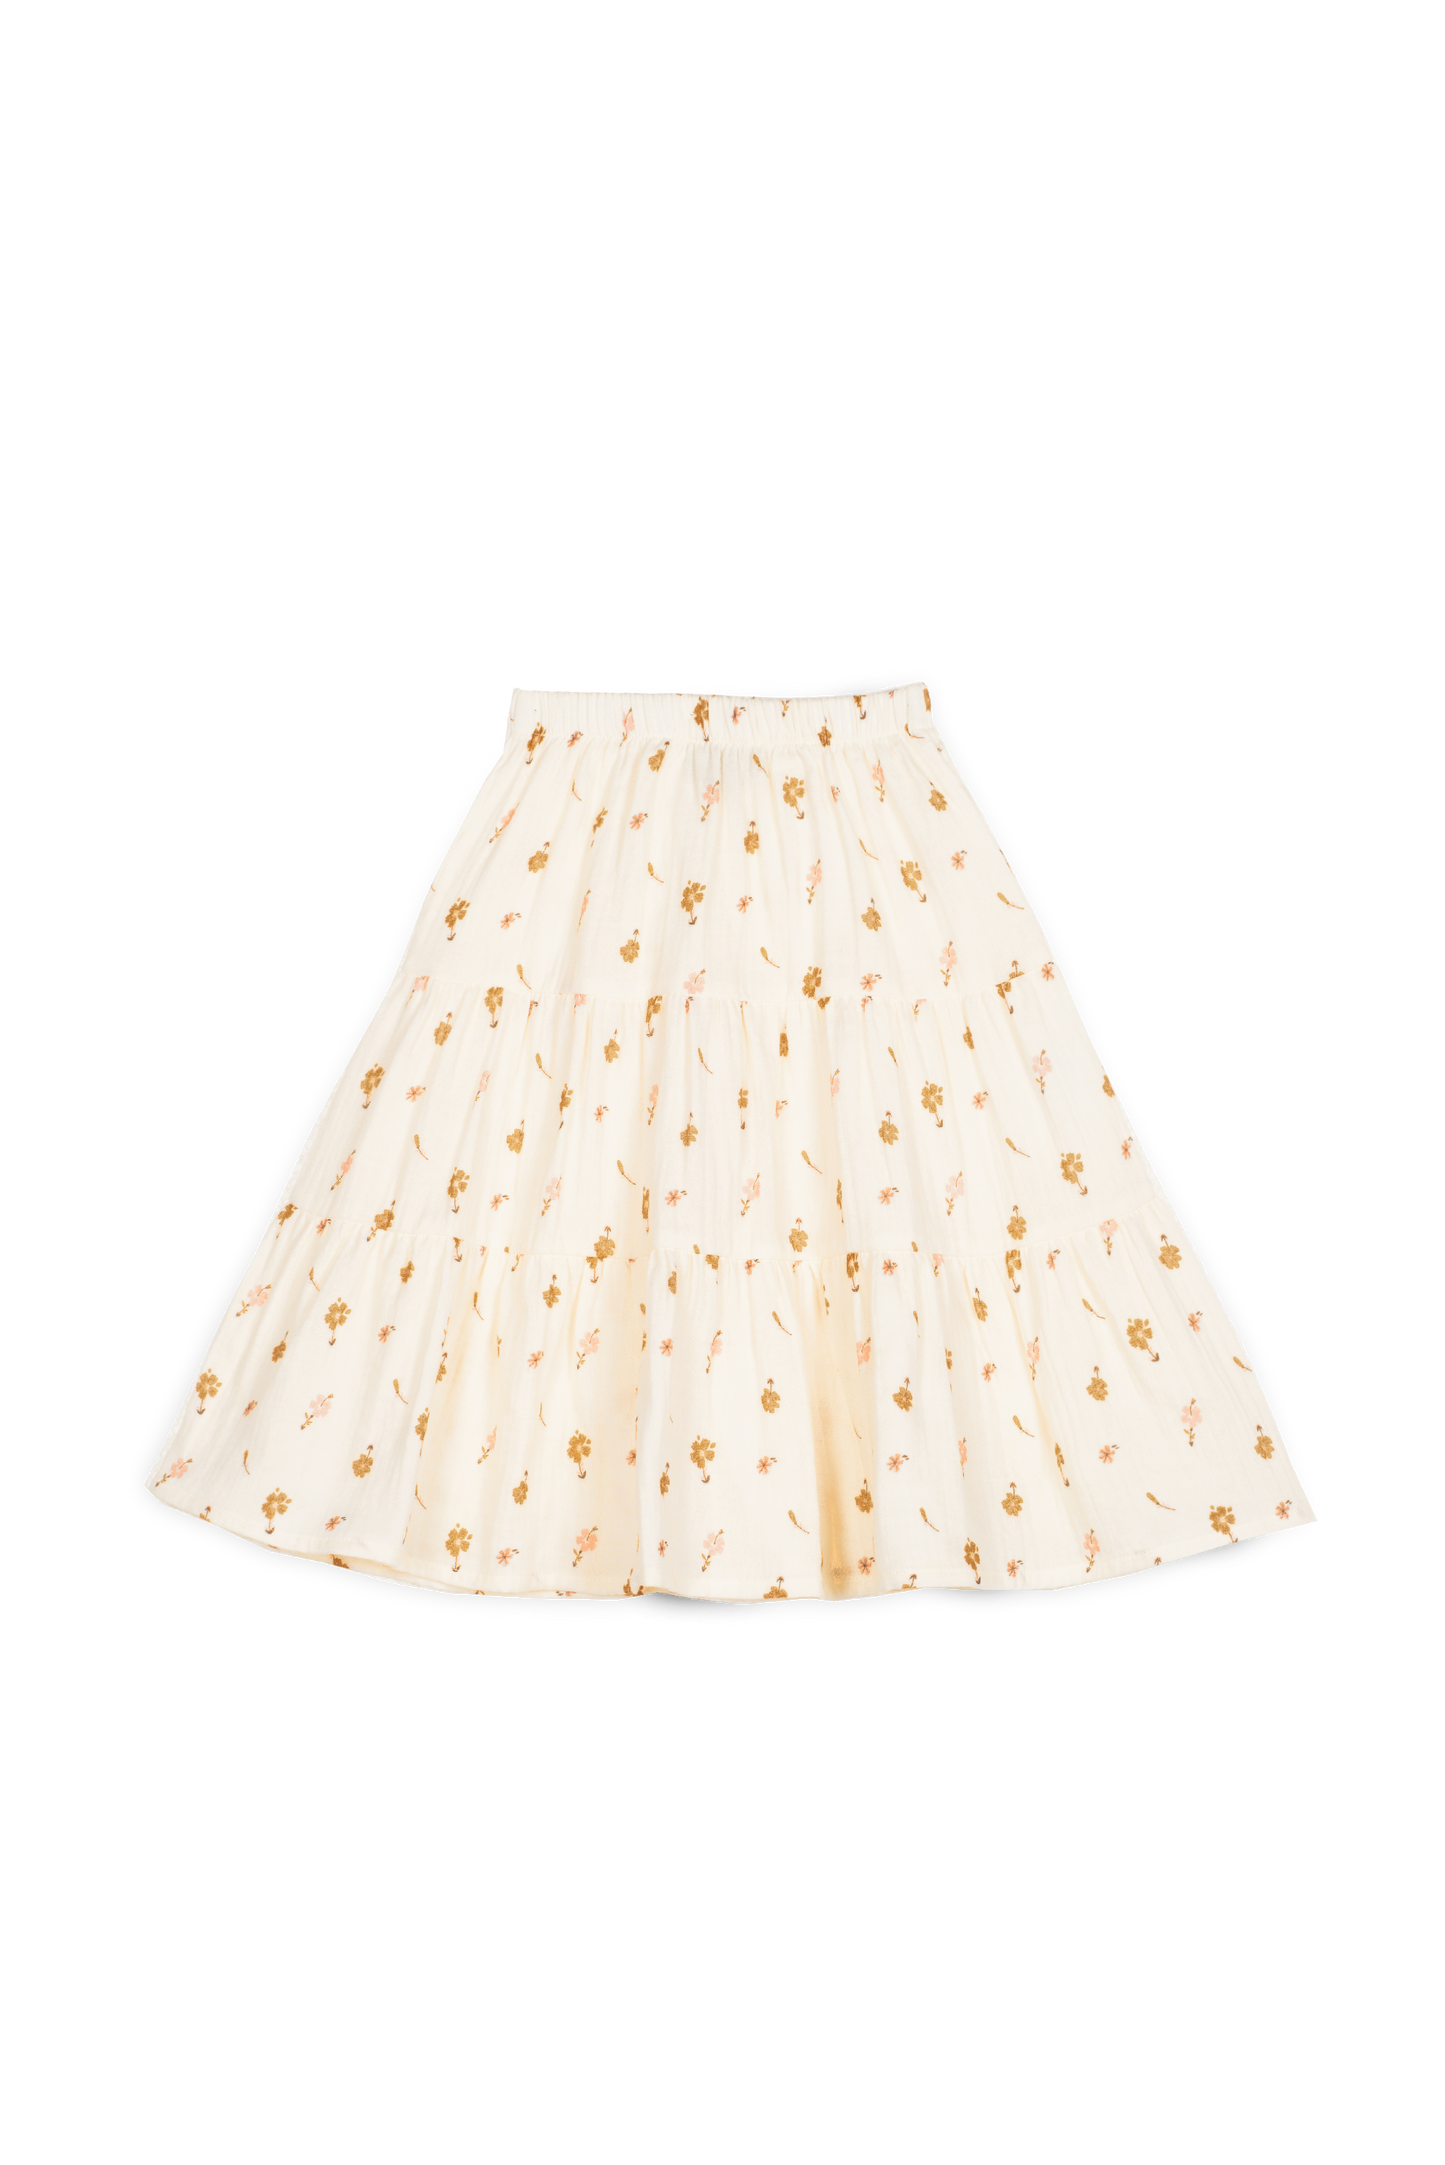 Mipounet Floral Printed Skirt- Pink